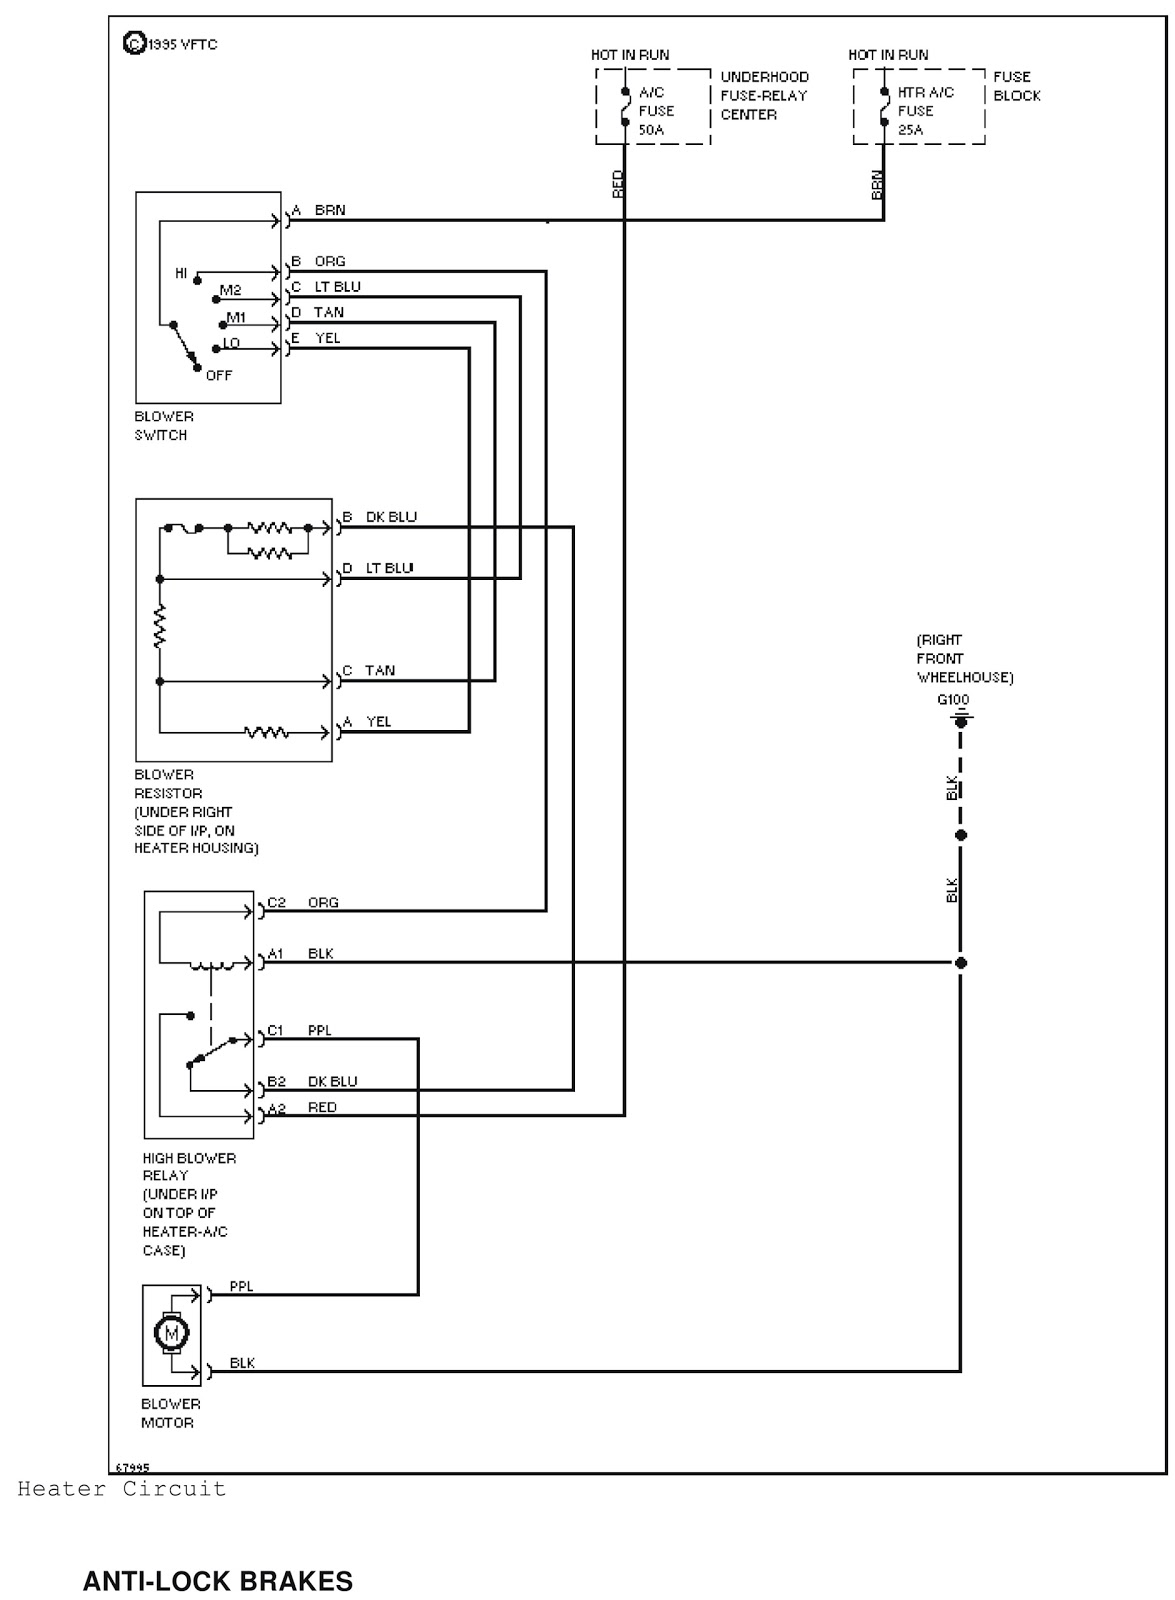 arco wiring diagrams